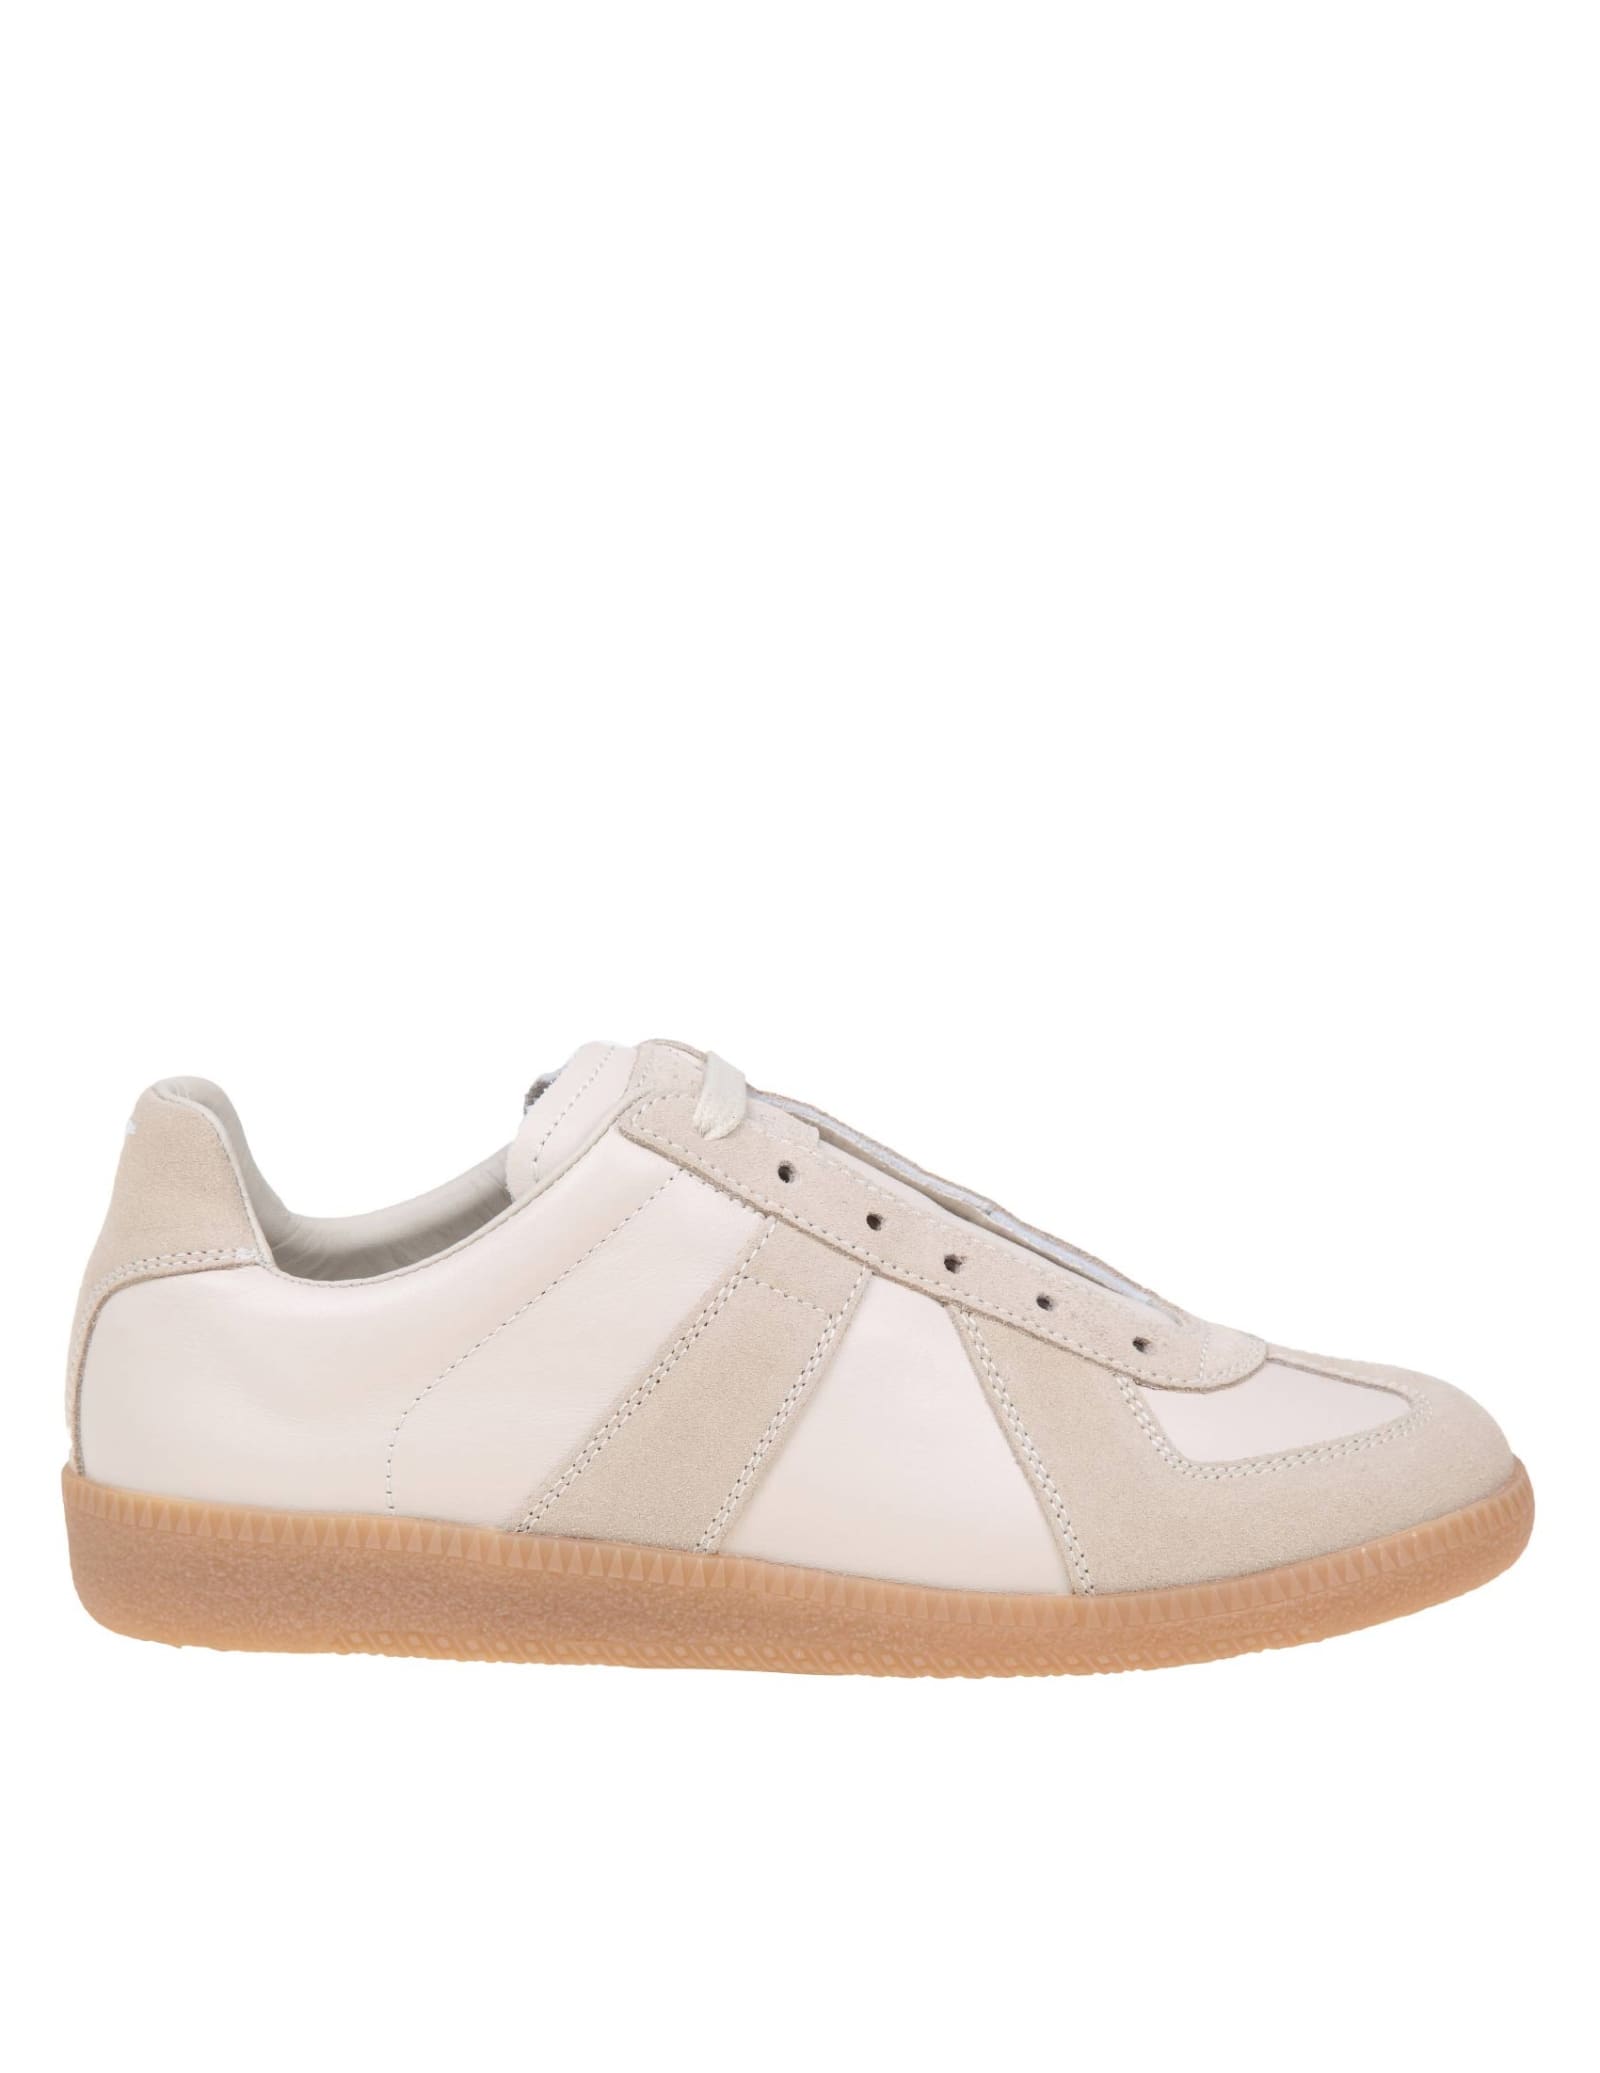 MAISON MARGIELA REPLICA SNEAKERS IN BEIGE LEATHER AND SUEDE